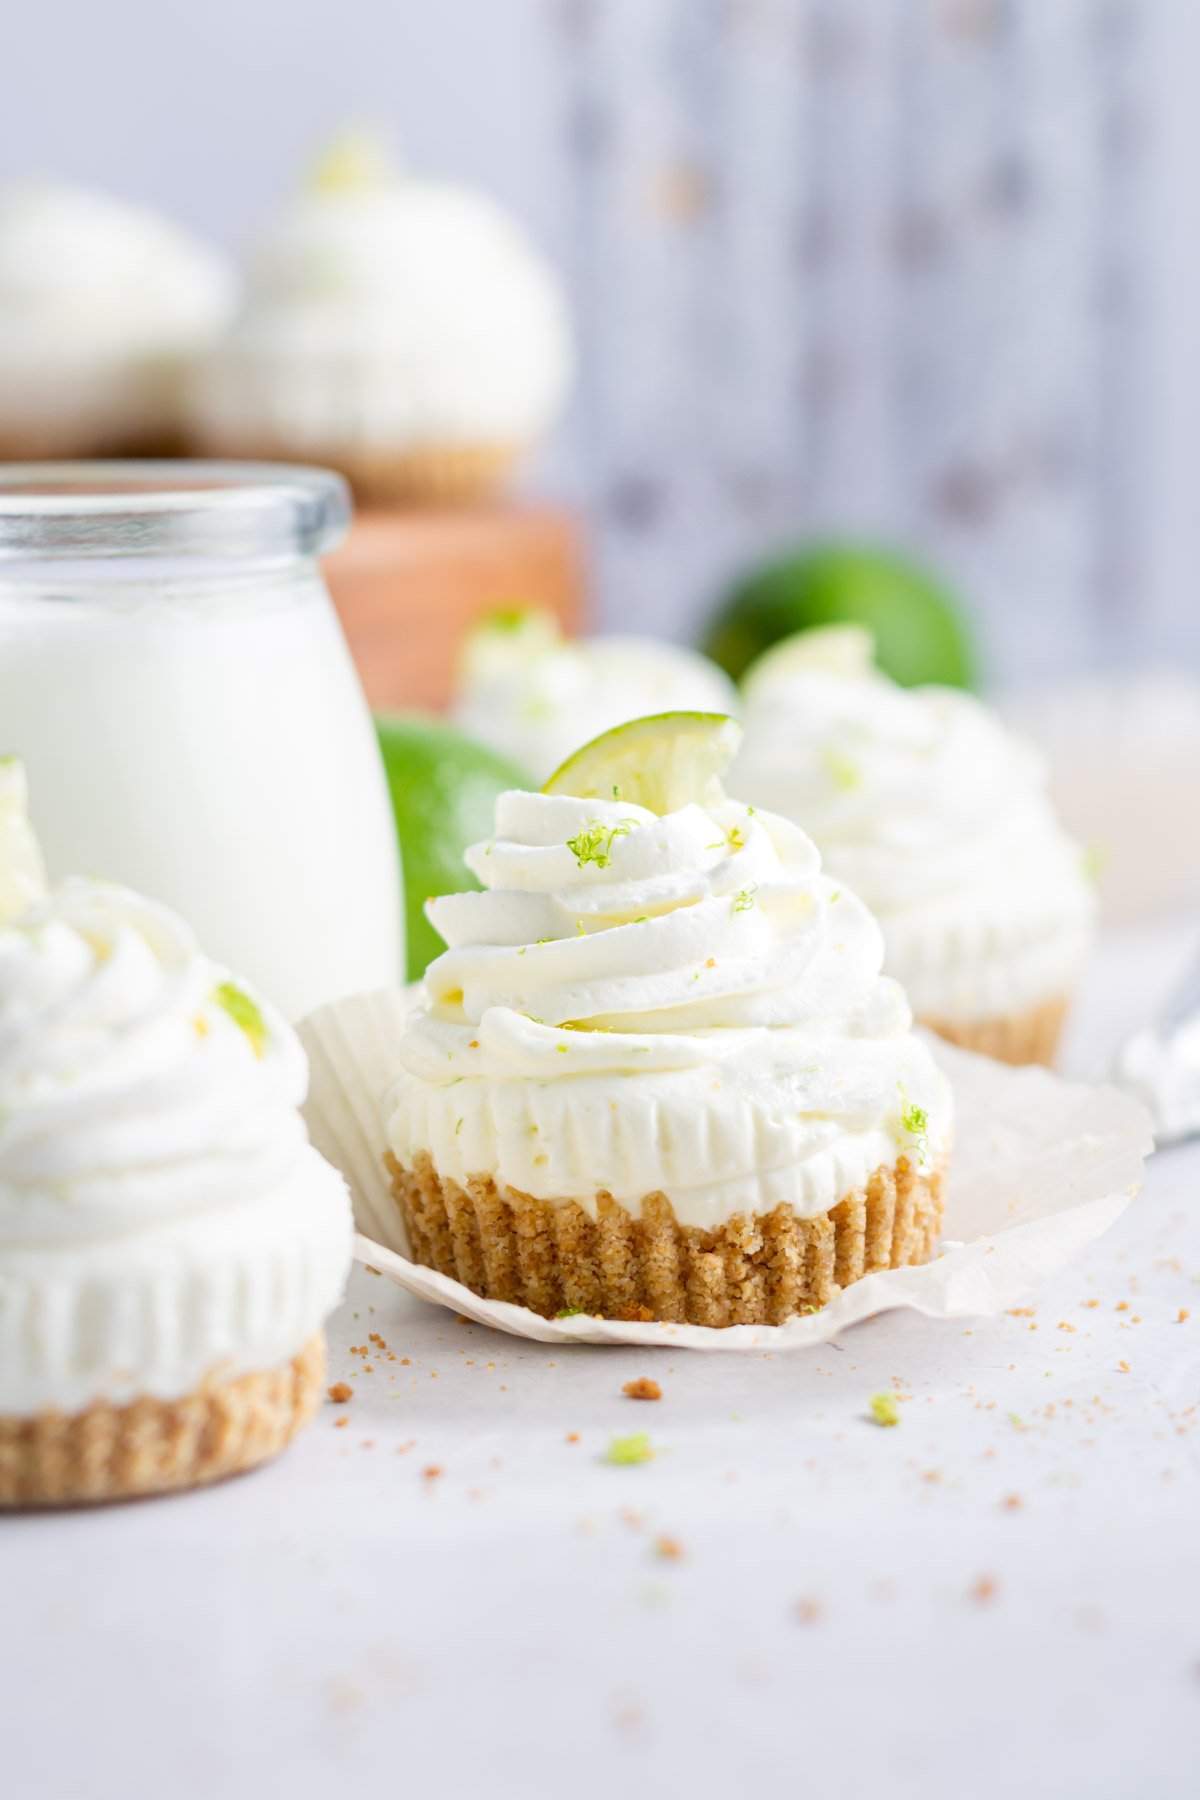 mini key lime cheesecake with a glass of milk